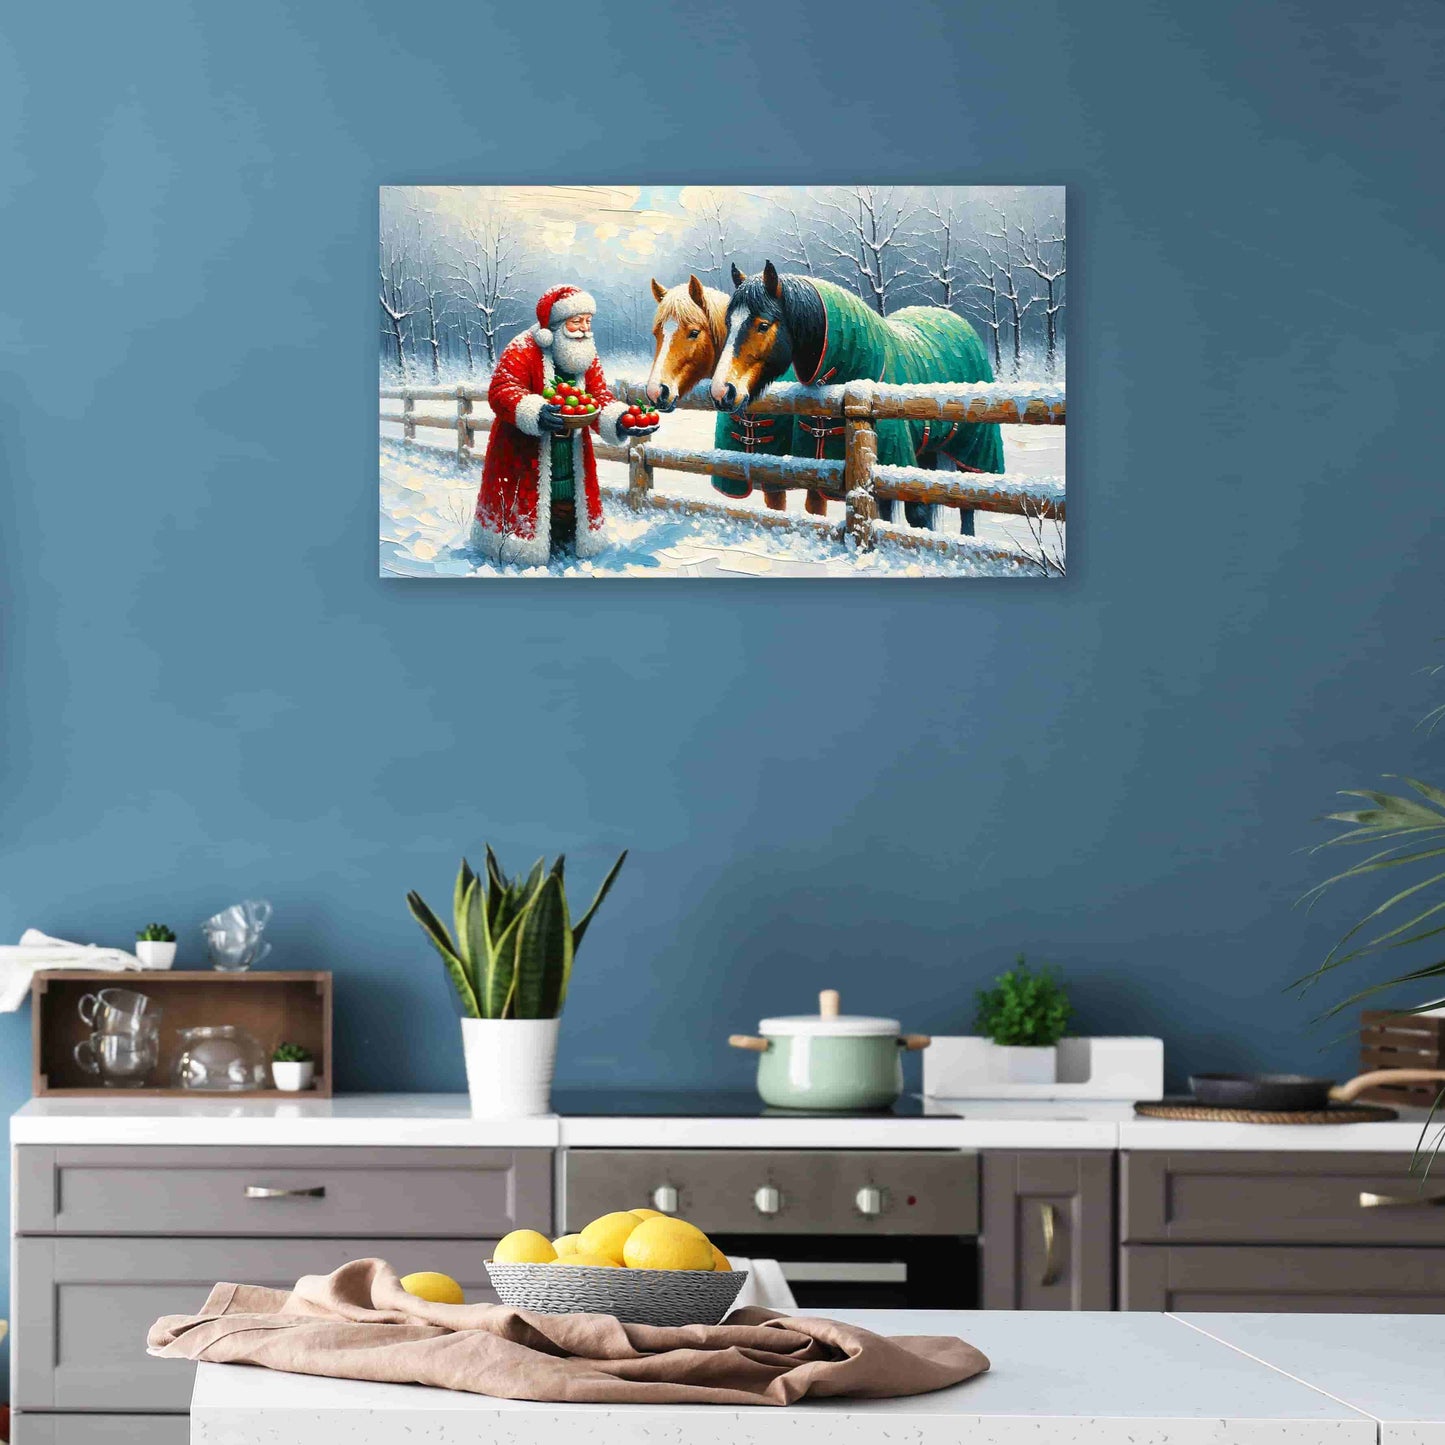 "Yuletide Companions - Santa's Gift to Gentle Friends" Canvas Wall Art Prints